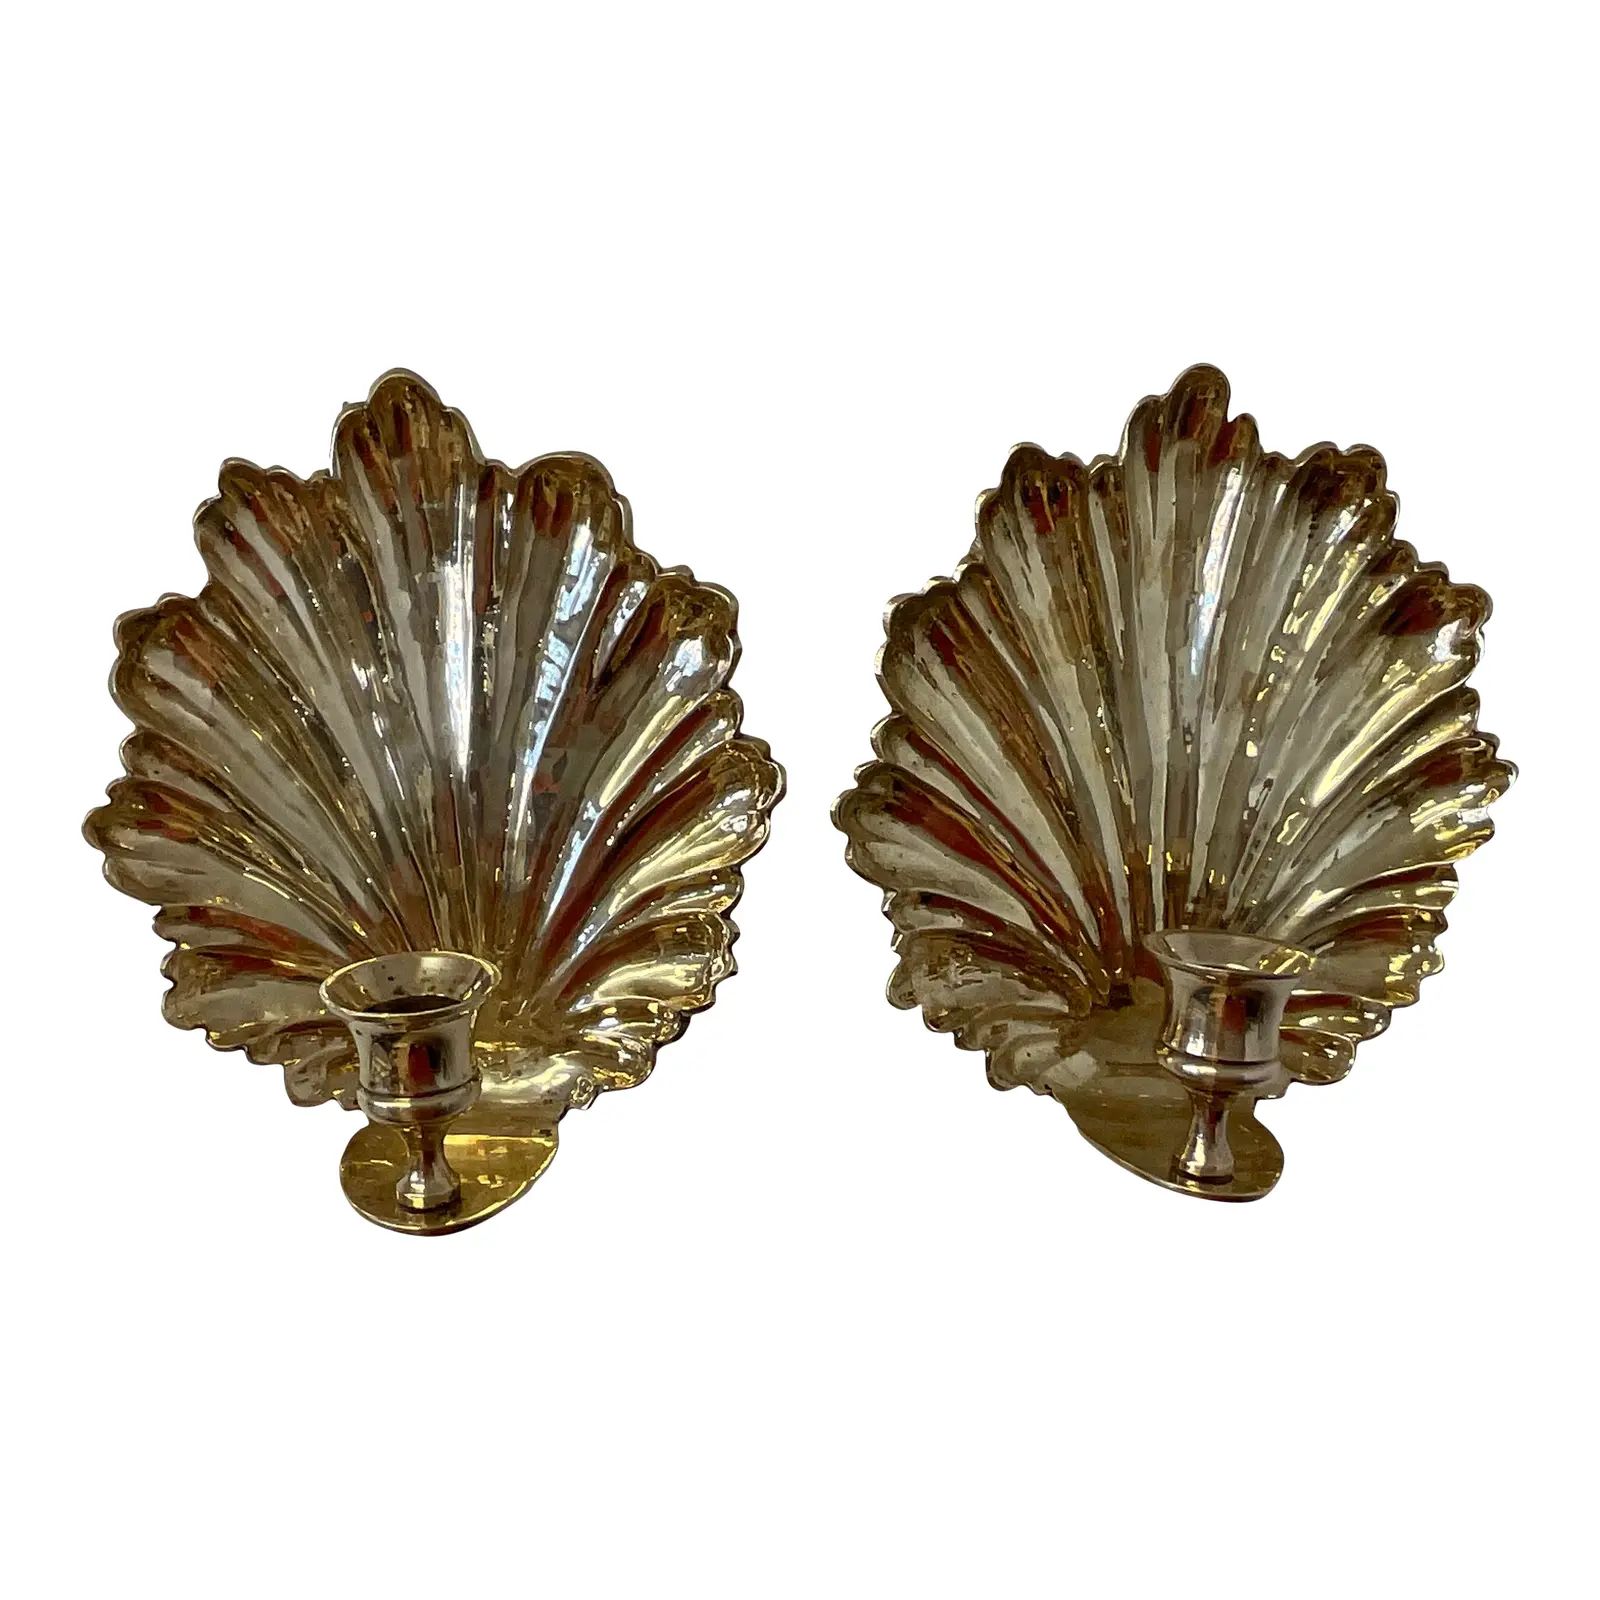 Mid 20th Century Vintage Brass Shell Wall Sconce Candle Holders - a Pair. | Chairish